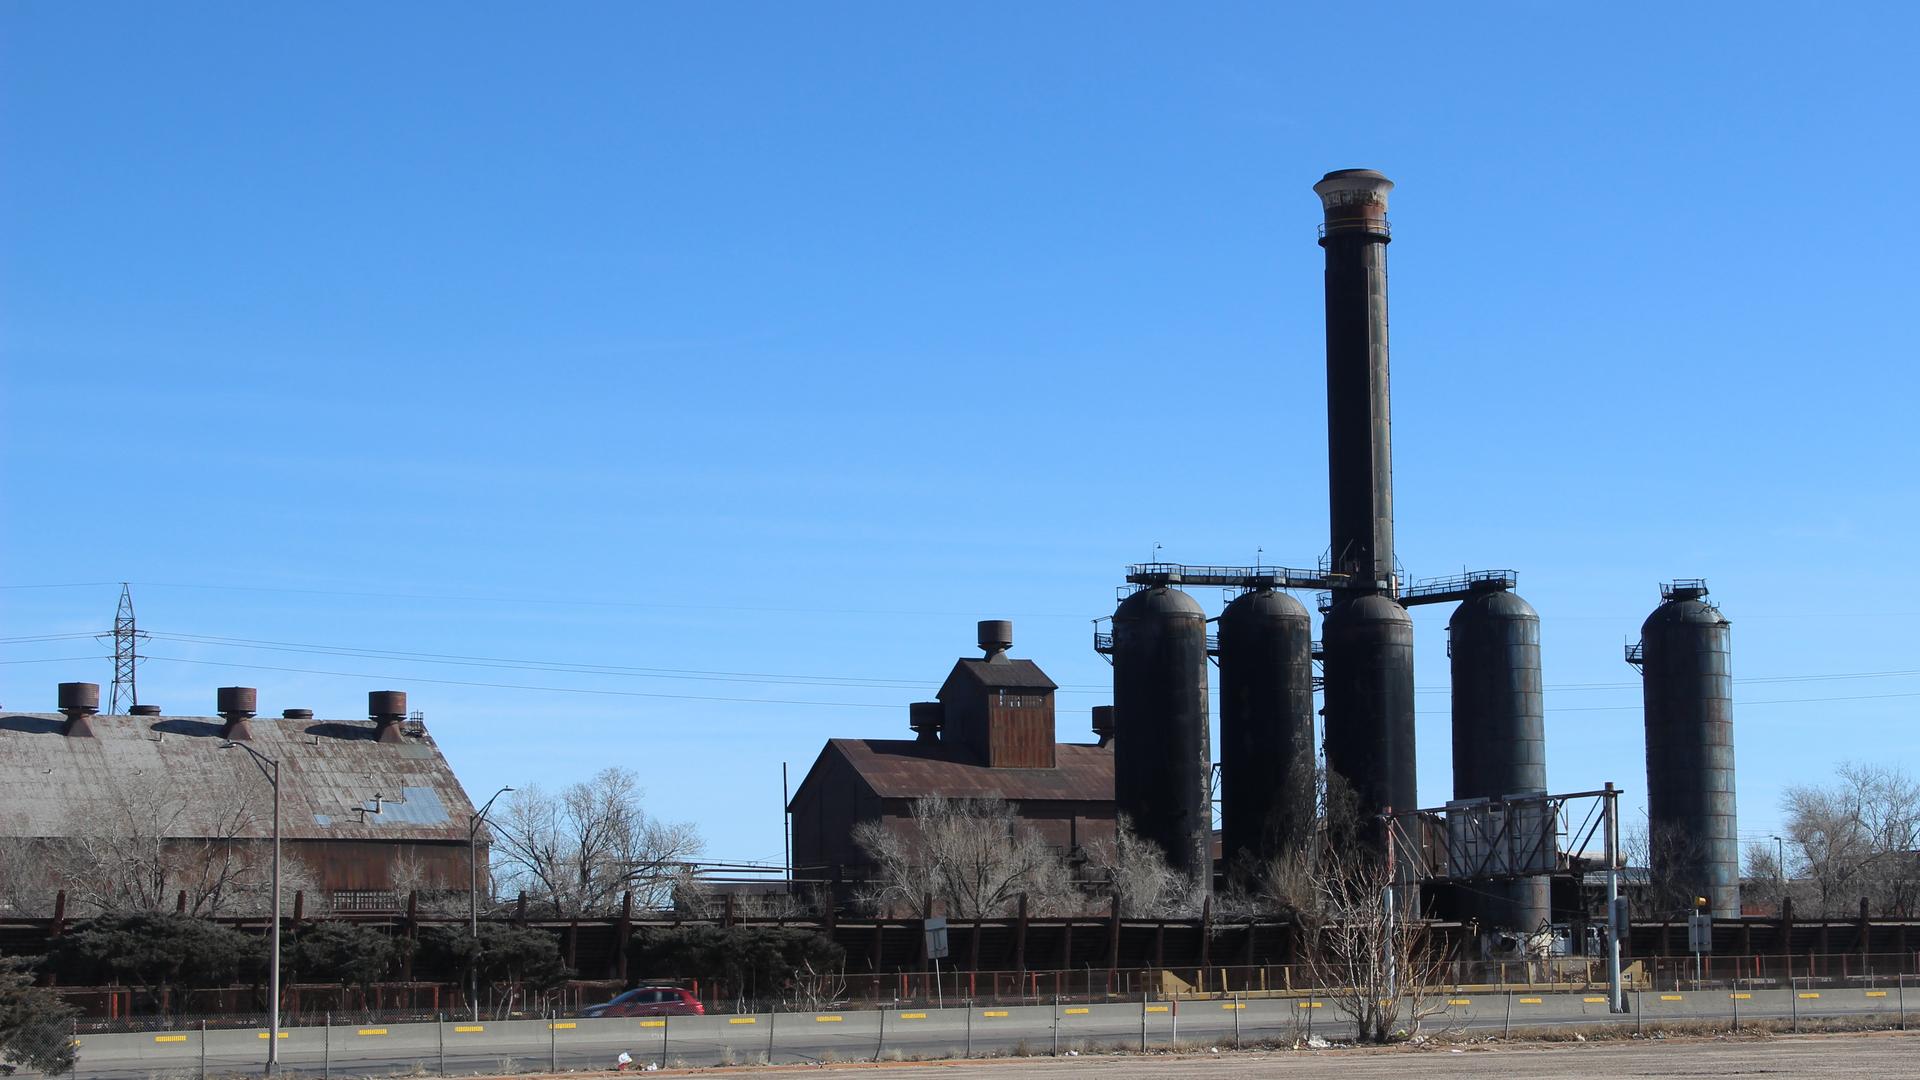 Pueblo was historically known as the “Pittsburgh of the West” for its steel. The city went from boom to bust as steel, and jobs, dried up. Environmentalists are now looking to green-energy jobs, such as building wind towers, to propel the city’s next chap